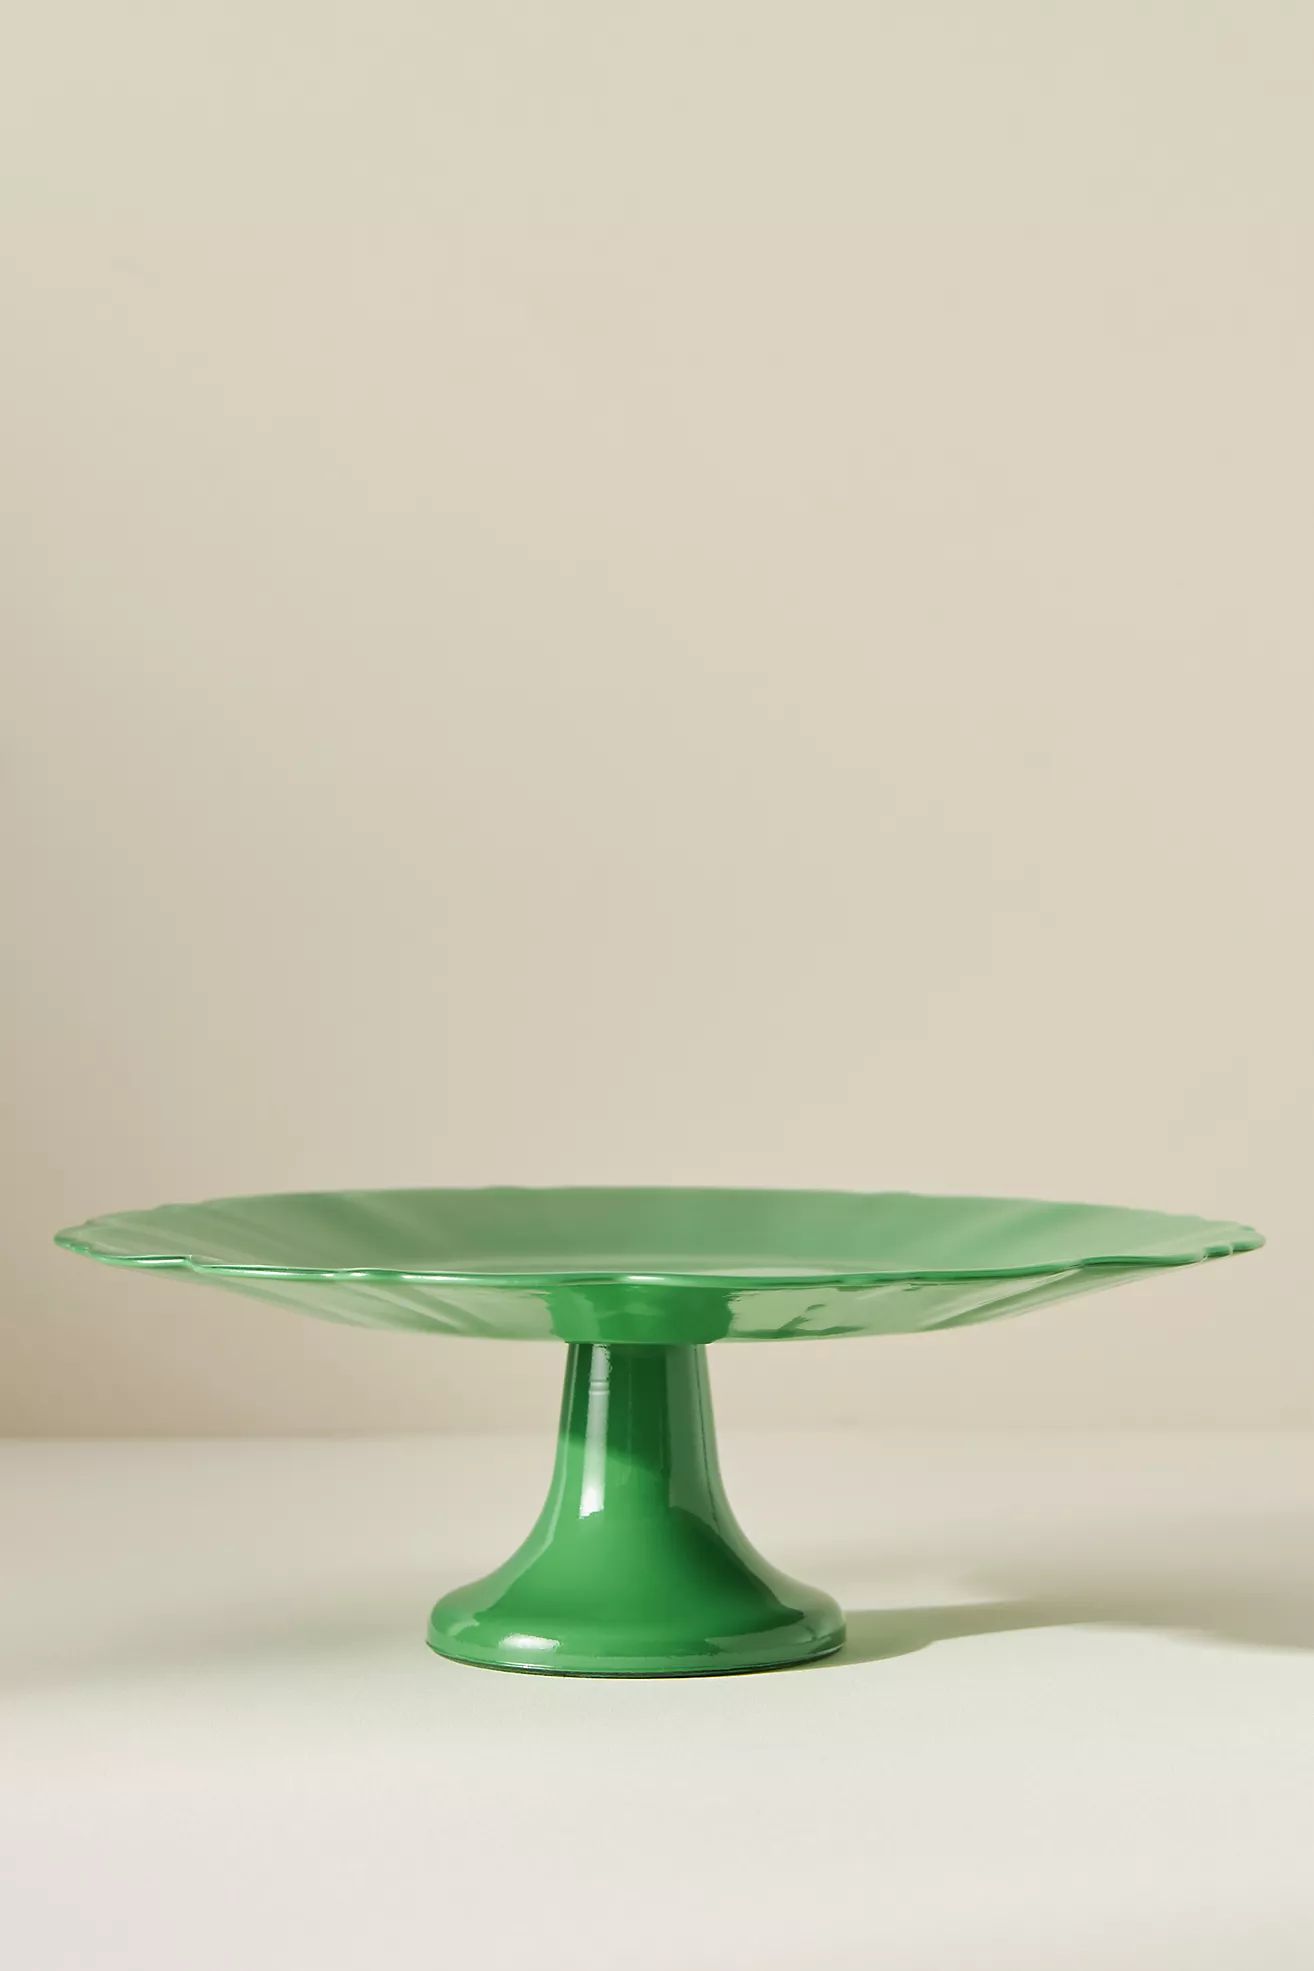 Adley Cake Stand | Anthropologie (US)